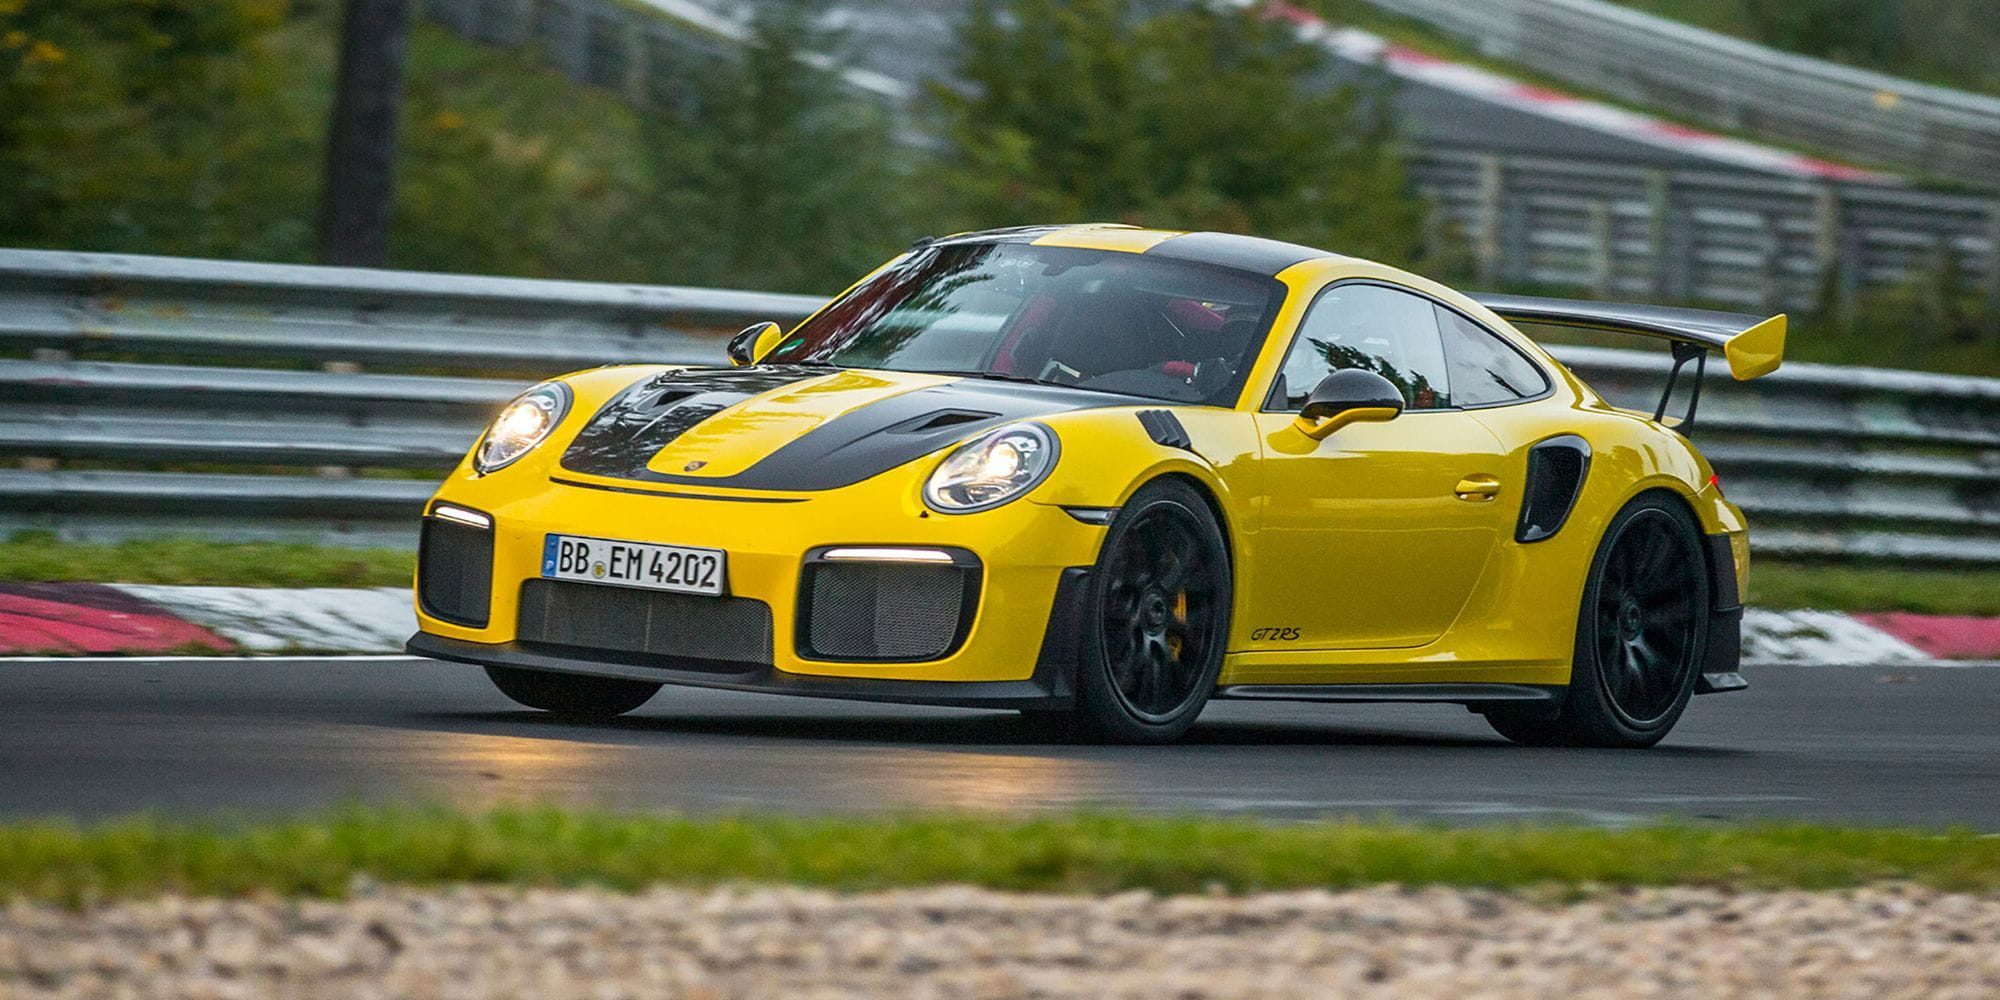 high-911-gt2-rs-world-record-nu-rburgring-2017-porsche-ag-1-1506609640